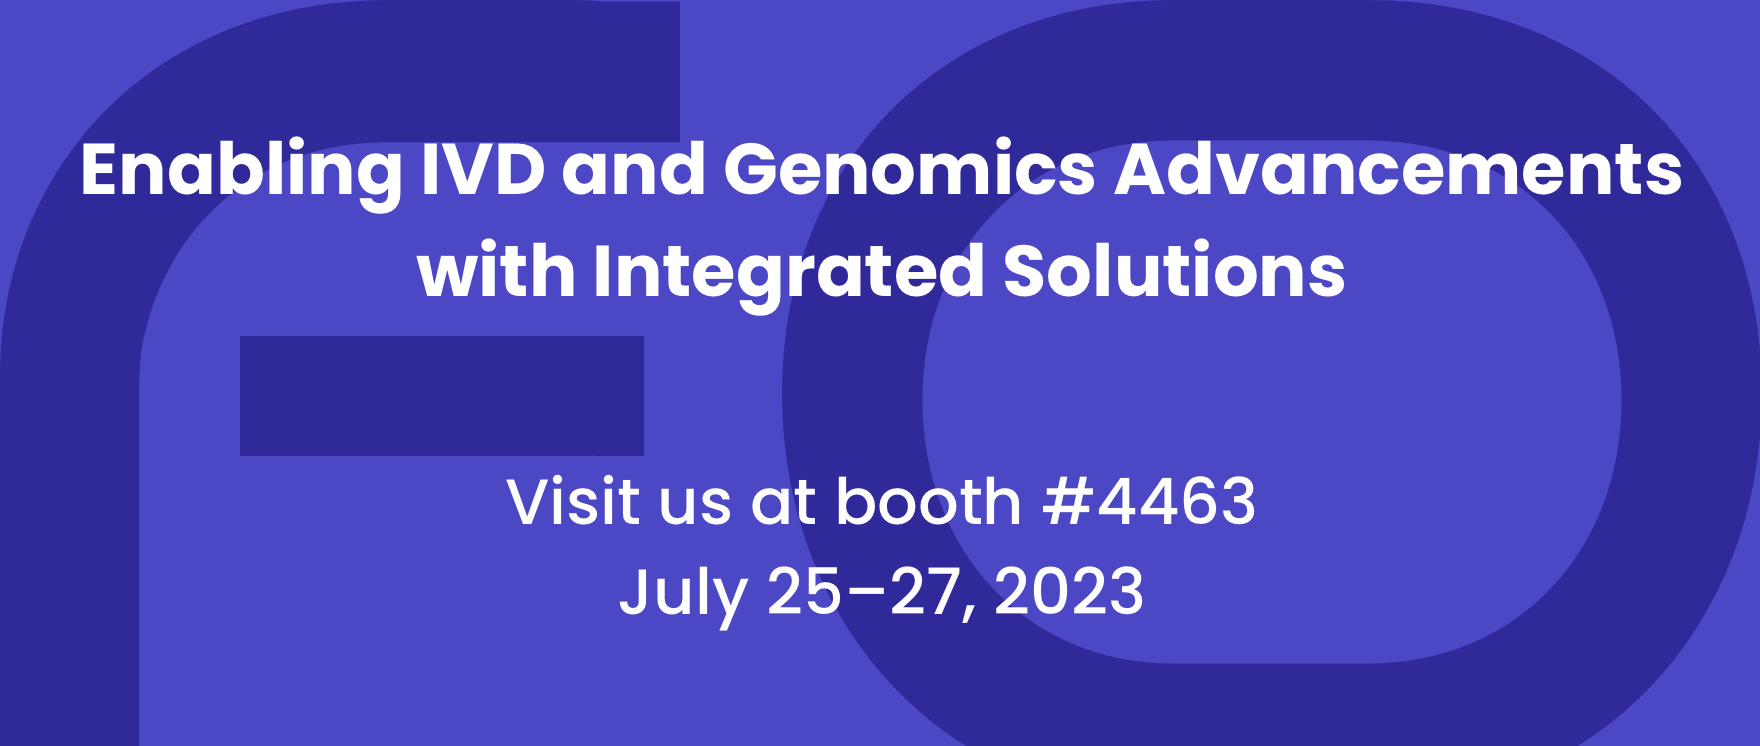 Enabling ID and Genomics Advancements with Integrated Solutions. Visit Us at Booth #4463,
July 25–27, 2023